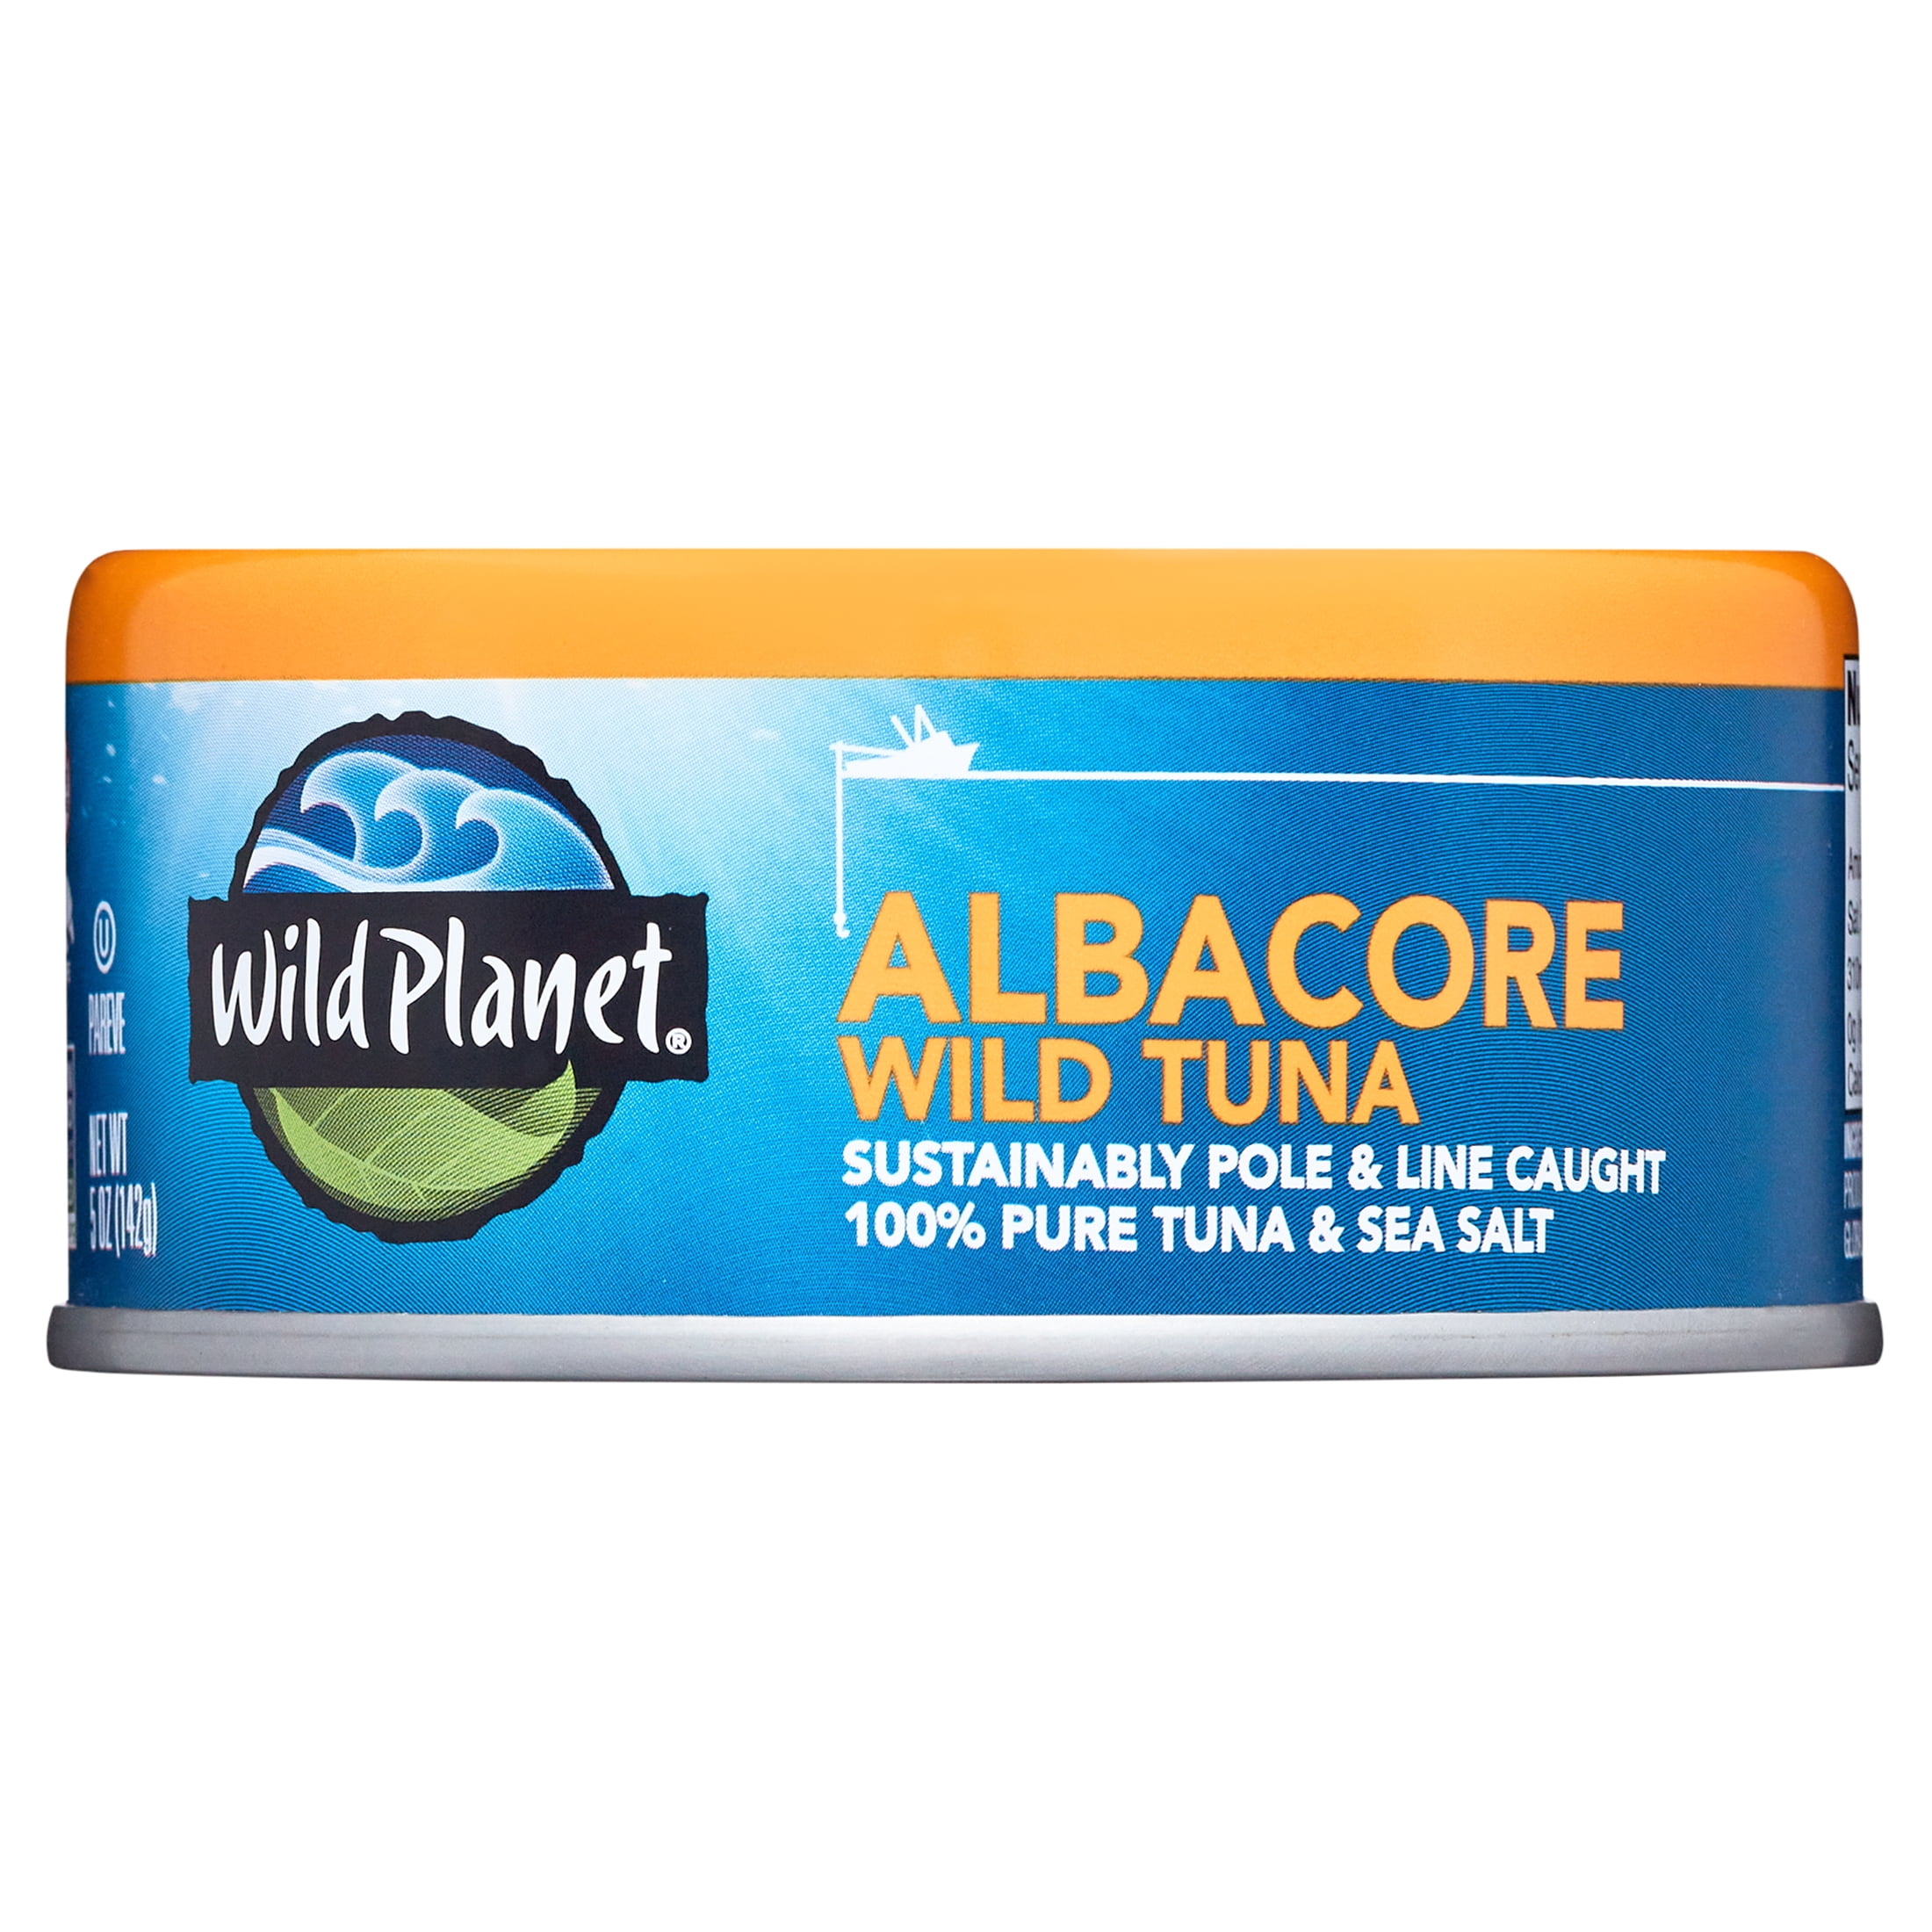 (4 Cans) Wild Planet Albacore Wild Tuna, Sea Salt, Pole and Line Caught,  5oz Cans